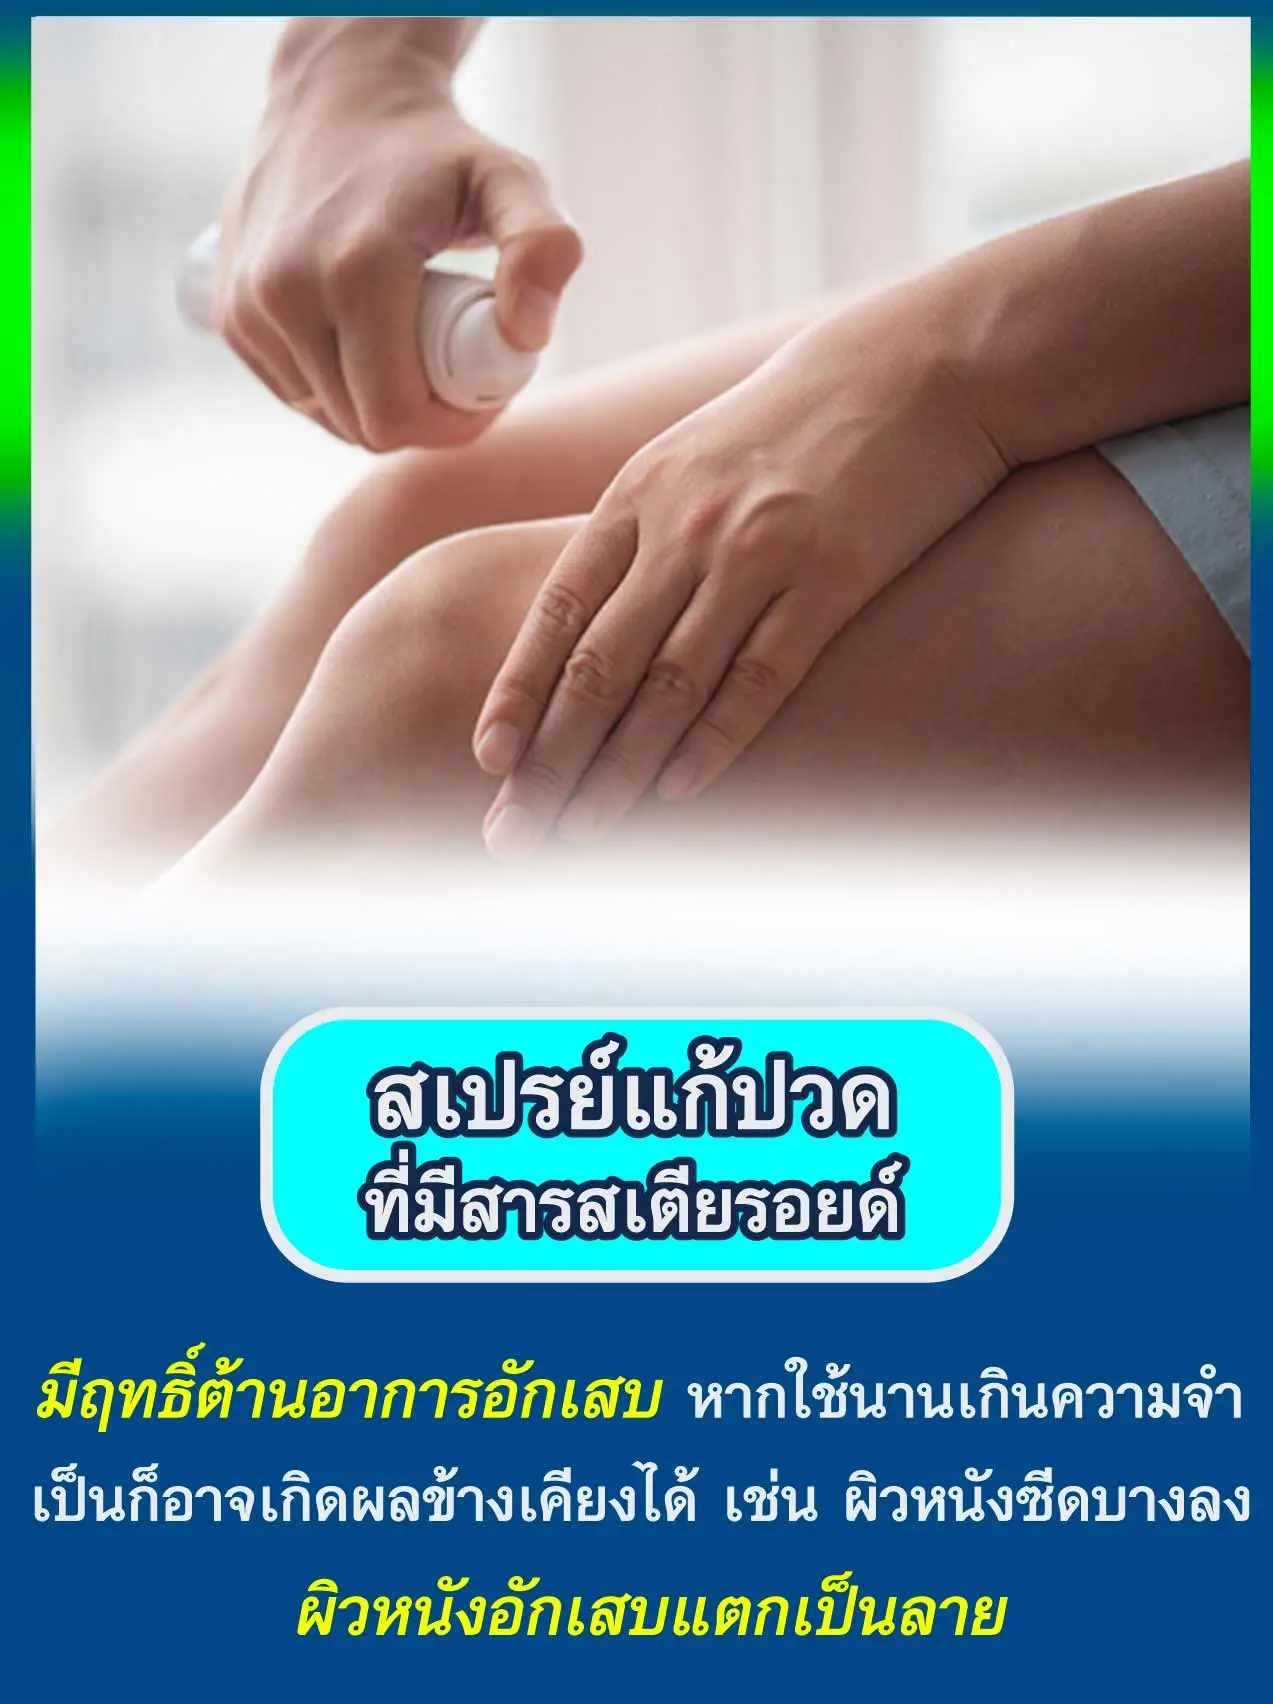 1-5-Knee-joint-spray-Medicine-for-knee-pain-relief